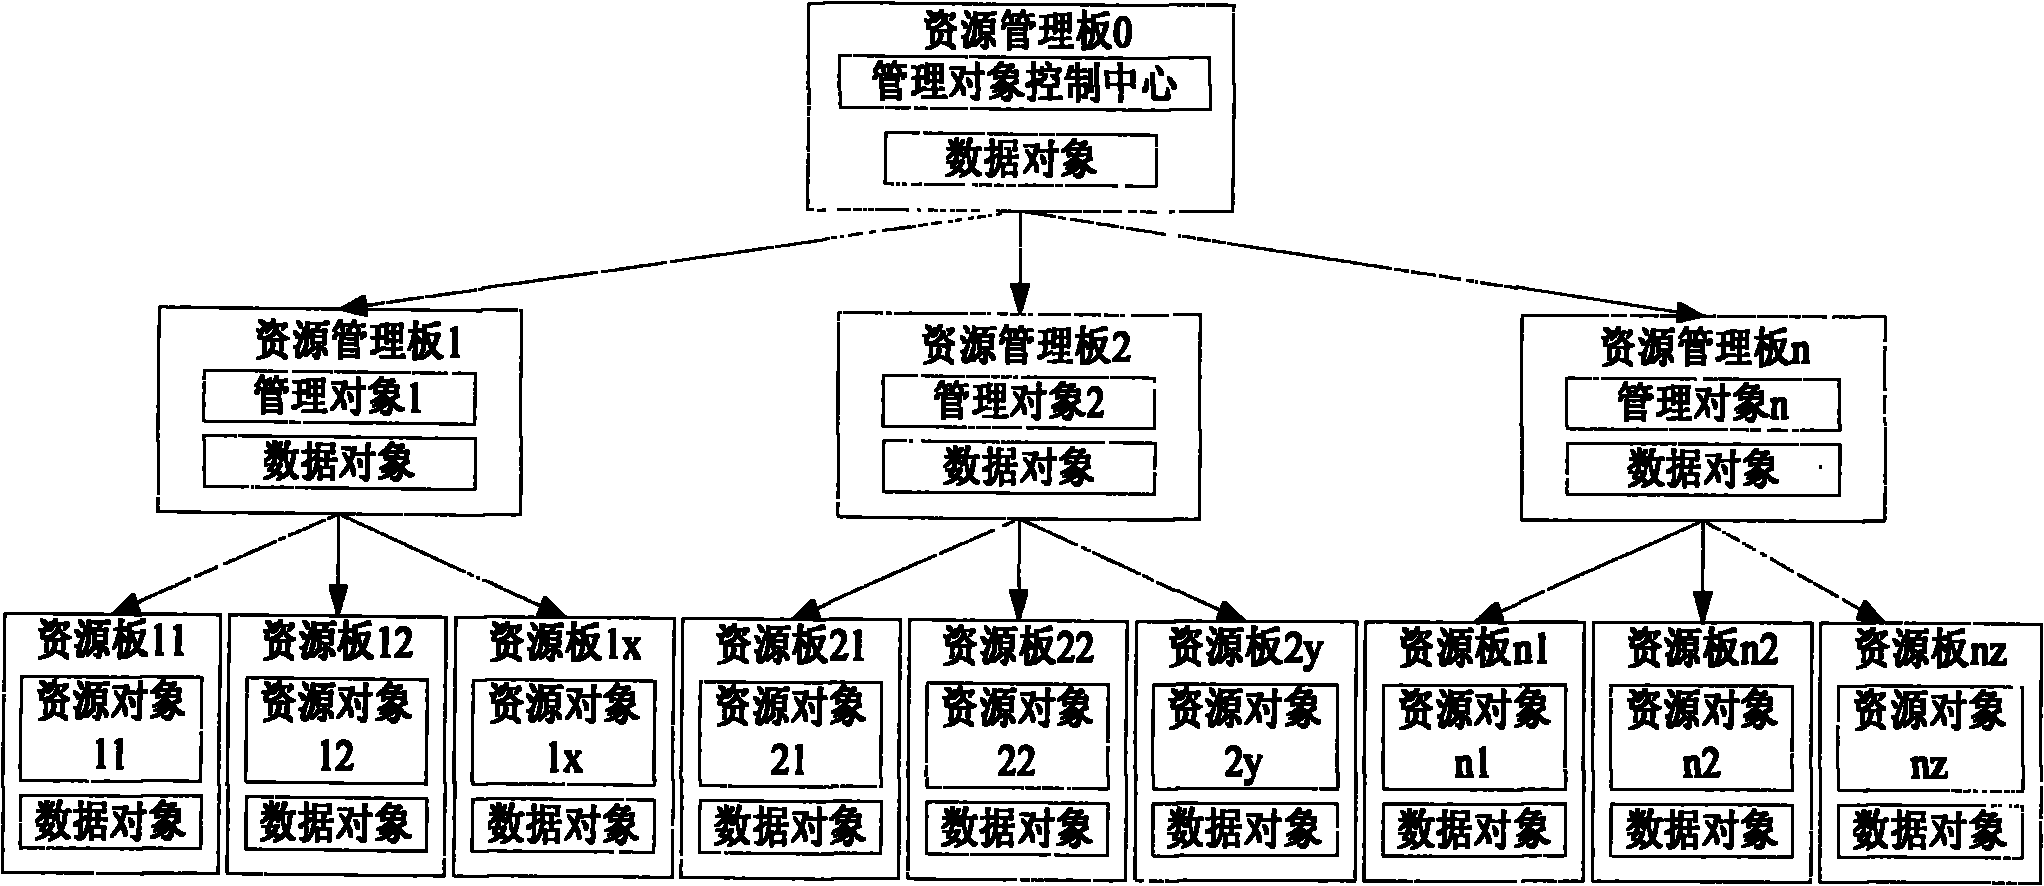 Method and system for managing distributed resources